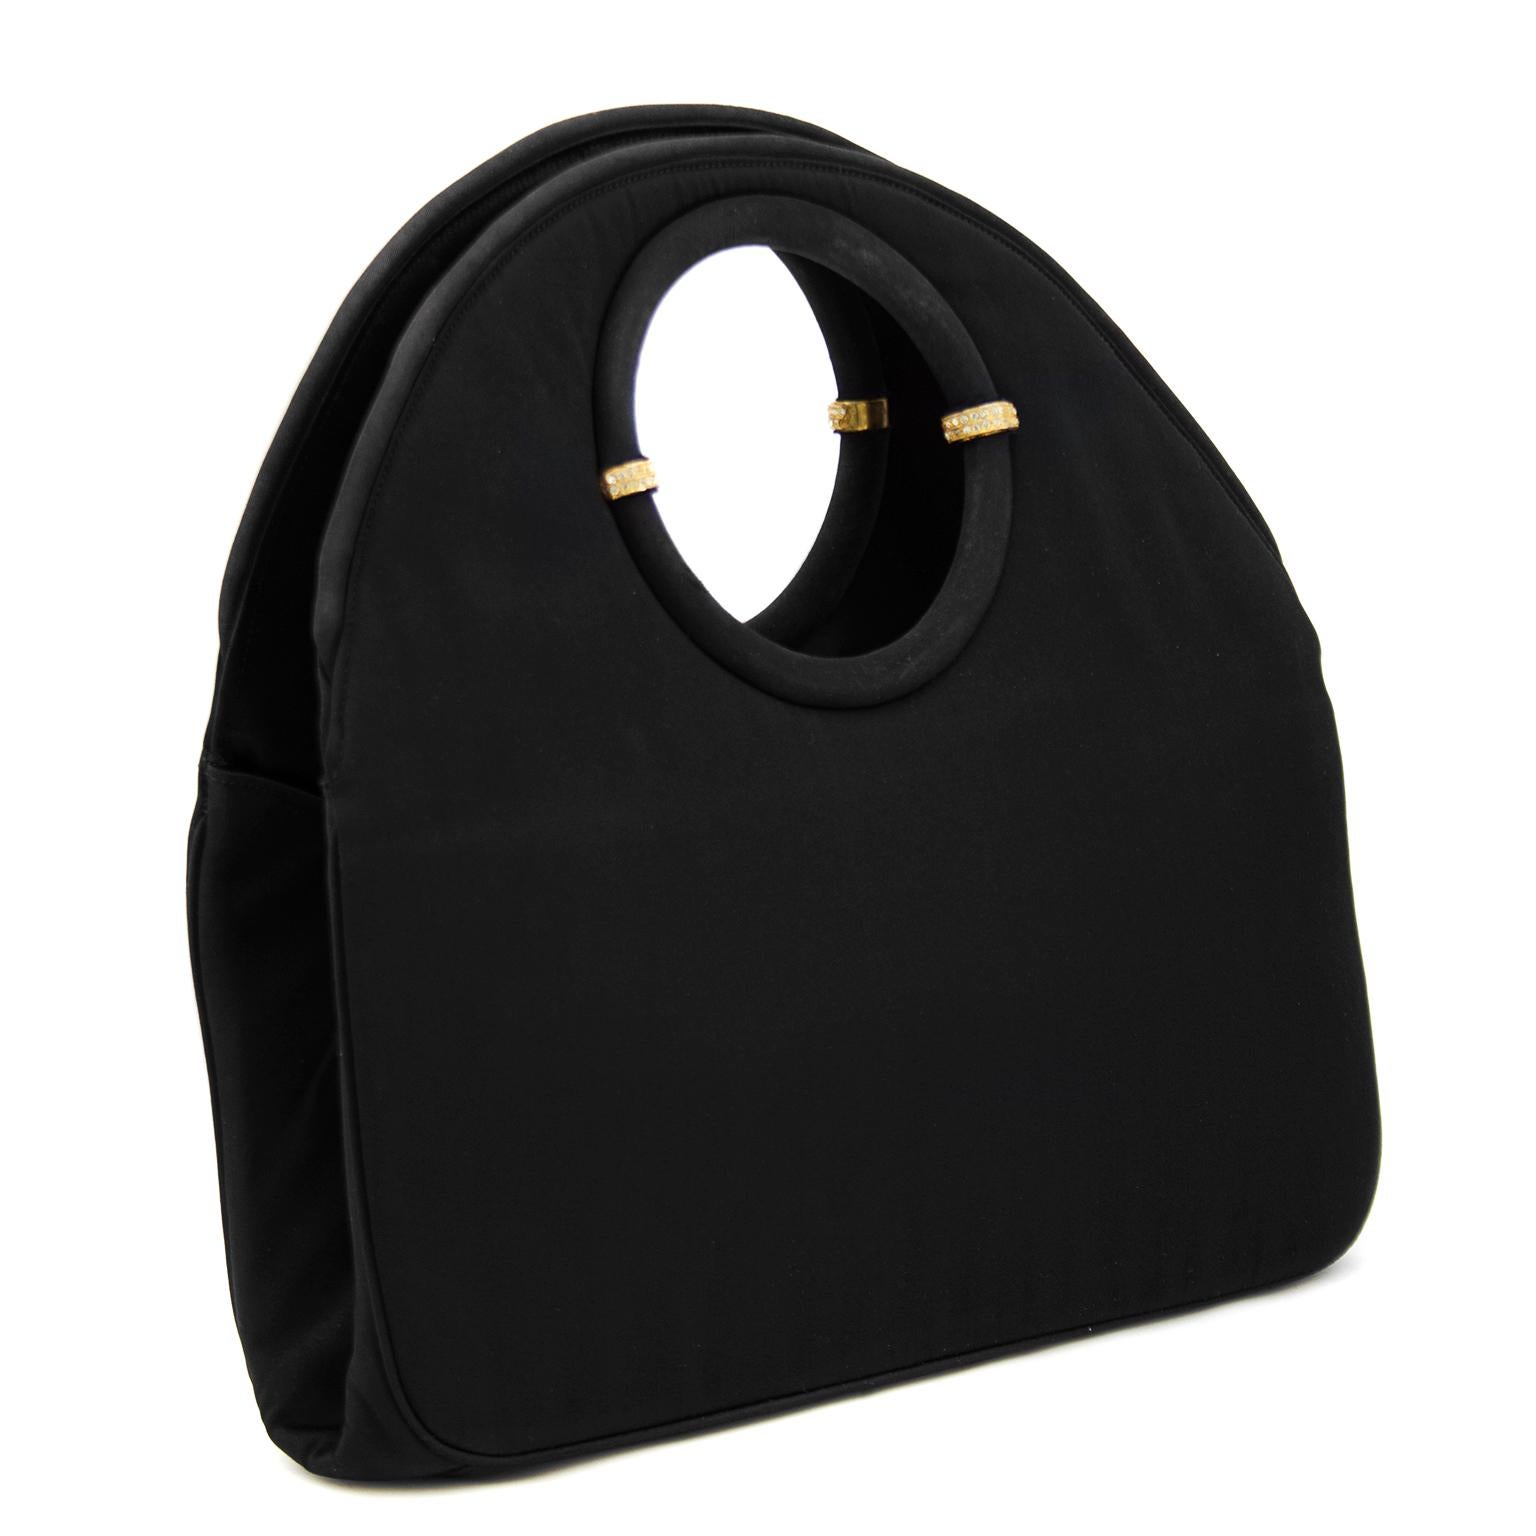 Late 1950's Twifaille by Rosenfeld black satin evening bag. The circular handle has gold and rhinestone embellishments along the inside that play up the rounded shape of this bag. The interior is fully lined and opens with two larger pockets on both